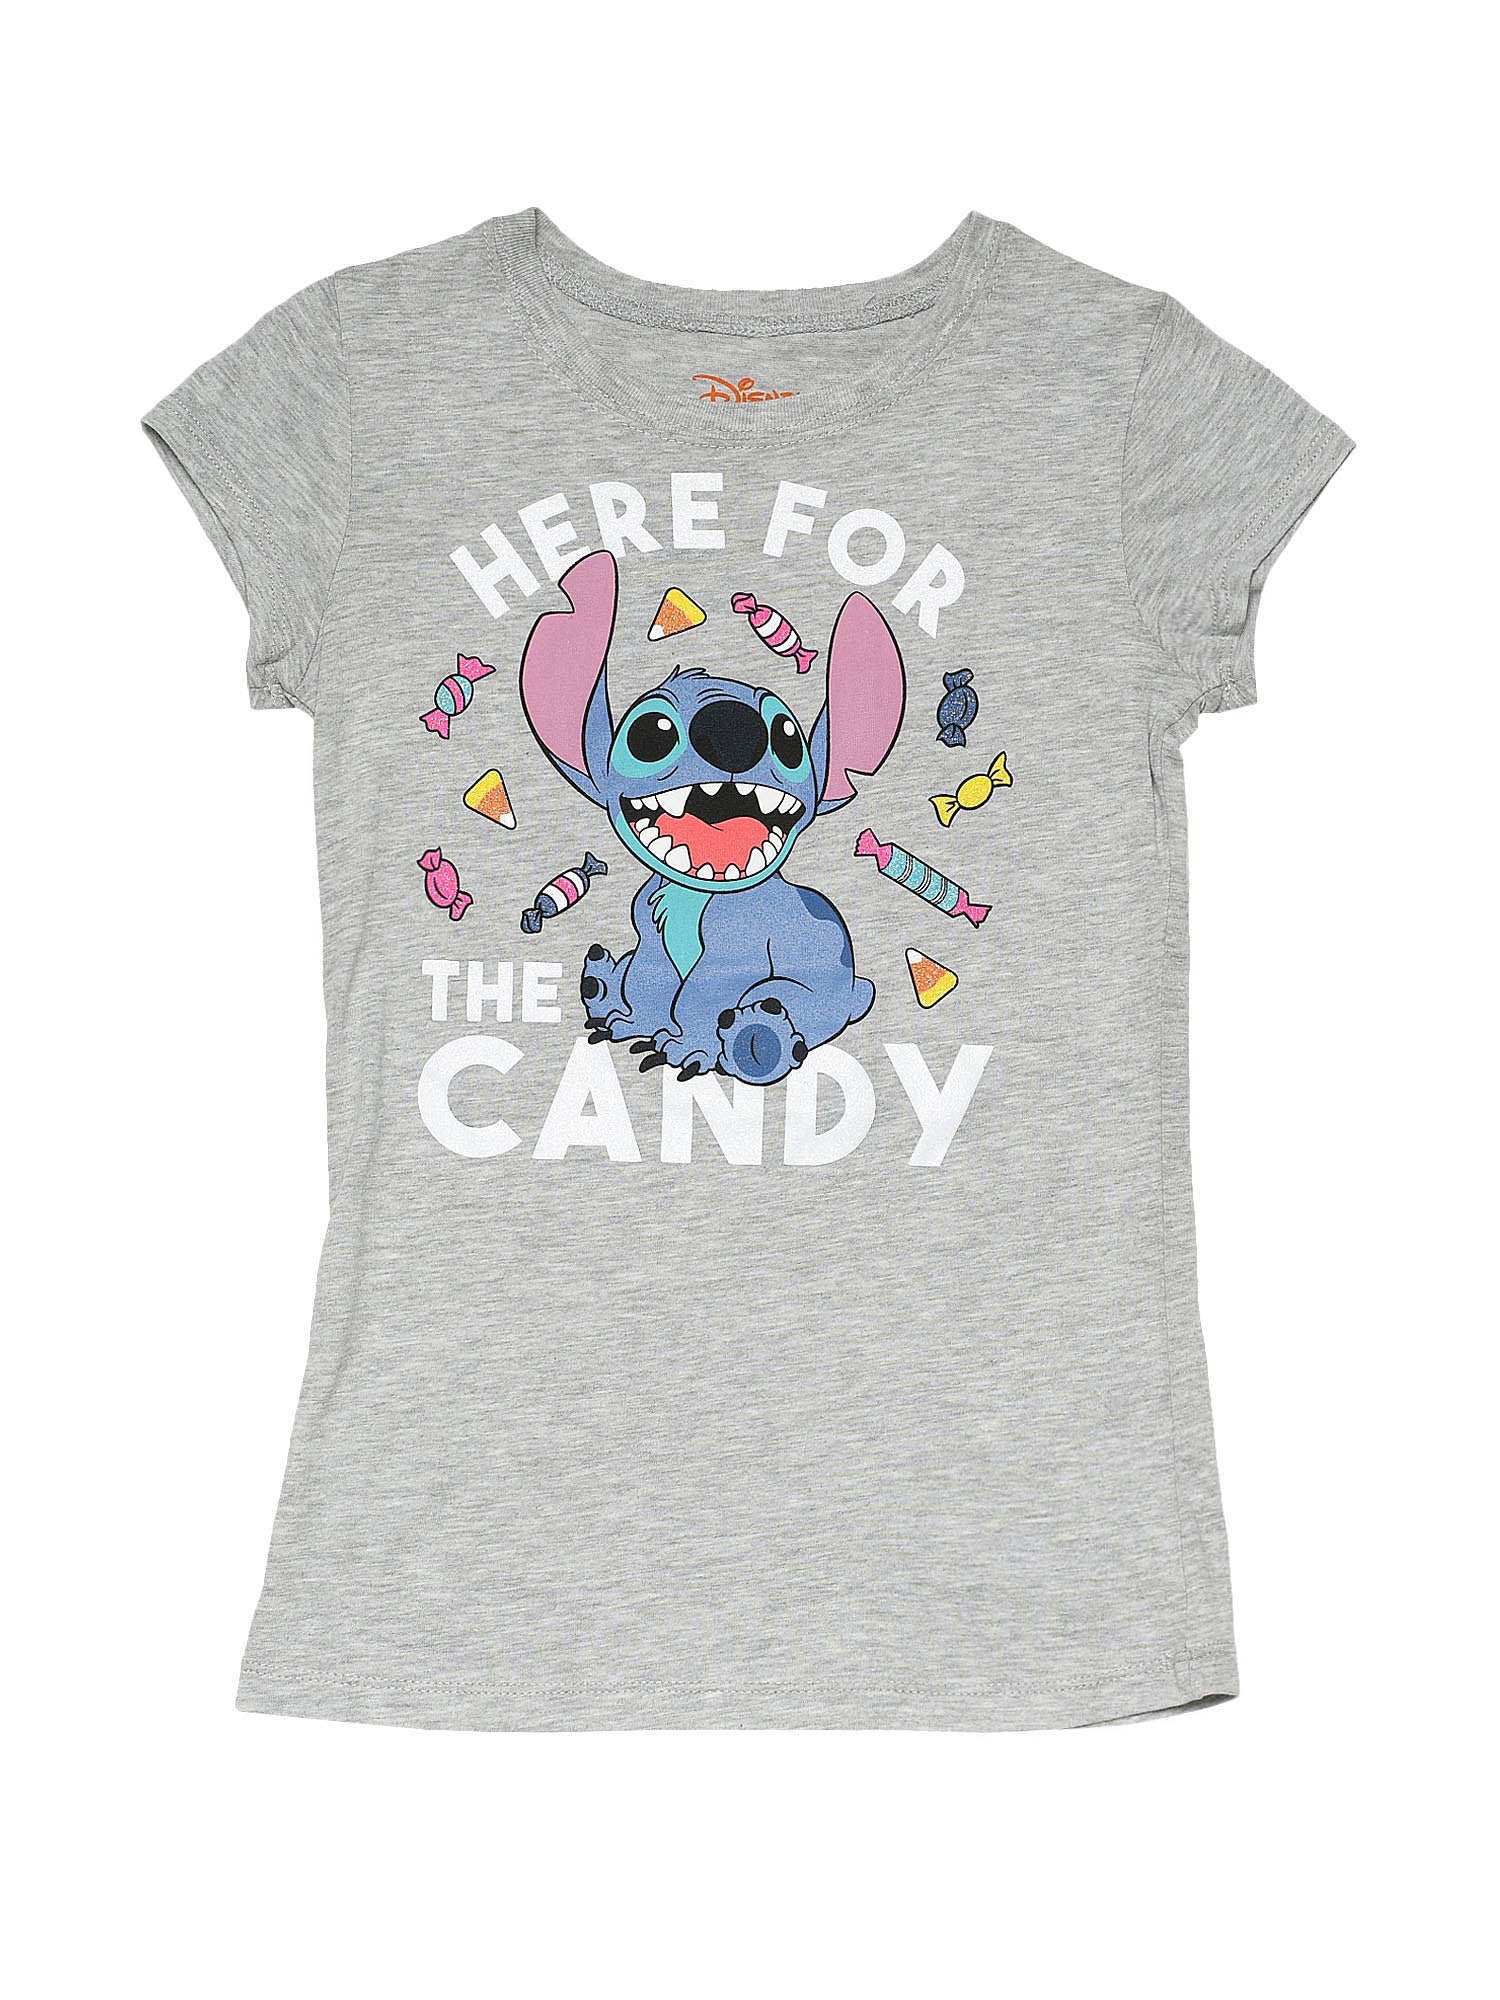 Disney Girls Lilo & Stitch Here For The Candy T-Shirt Cute Gray (Medium)